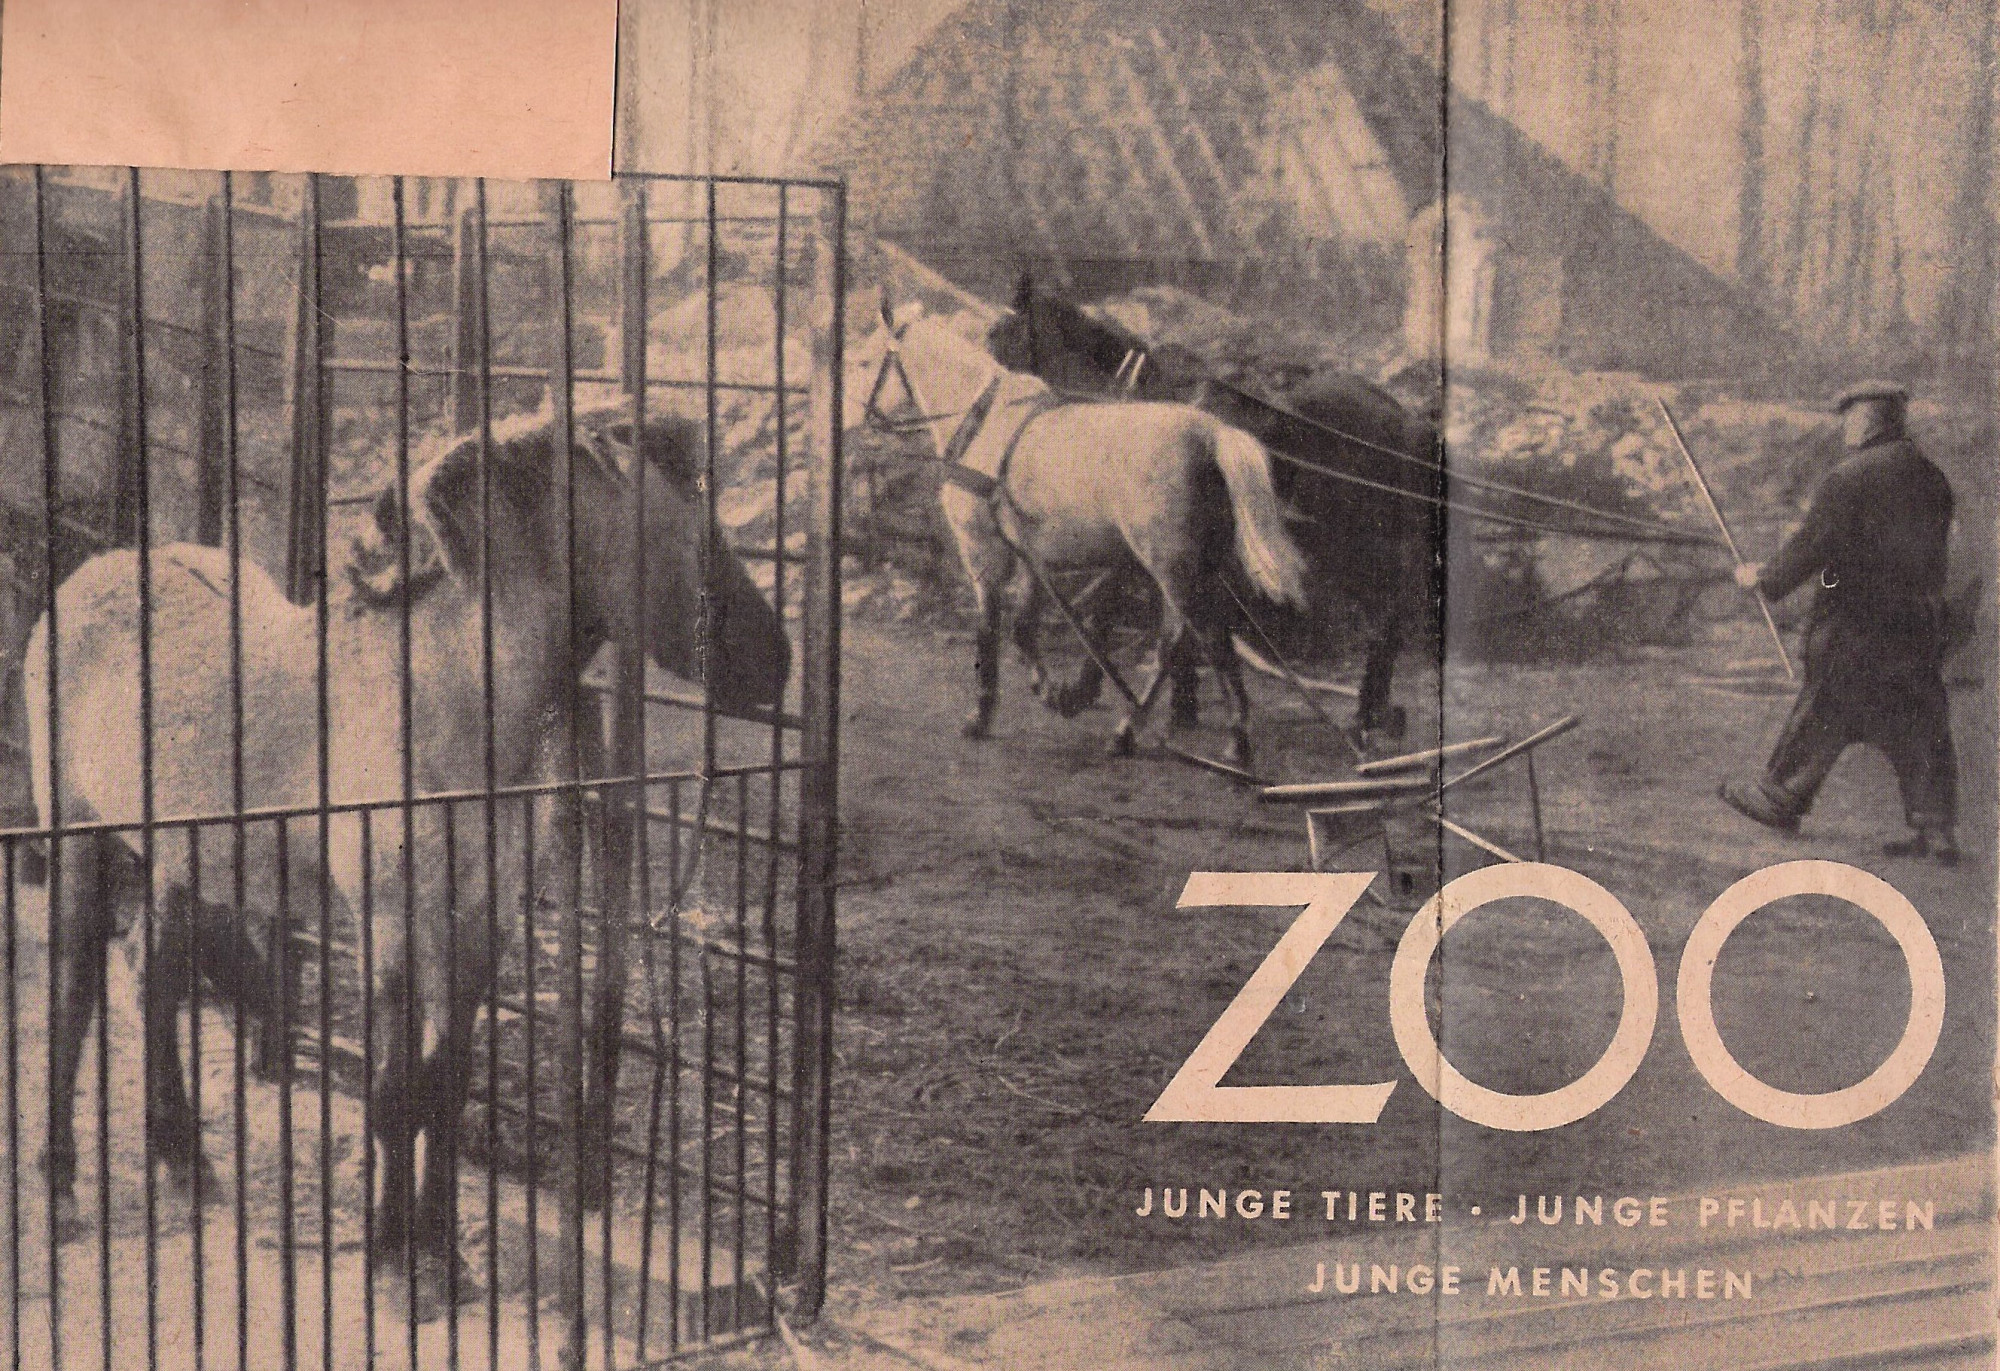 Newspaper clipping. Headline: The Zoo: Young animals, young plants, young people. Photograph: Person with a plough, to which a dark-colored and a light-colored horse are harnessed. To the side, a small, hoofed animal in a cage with bars.